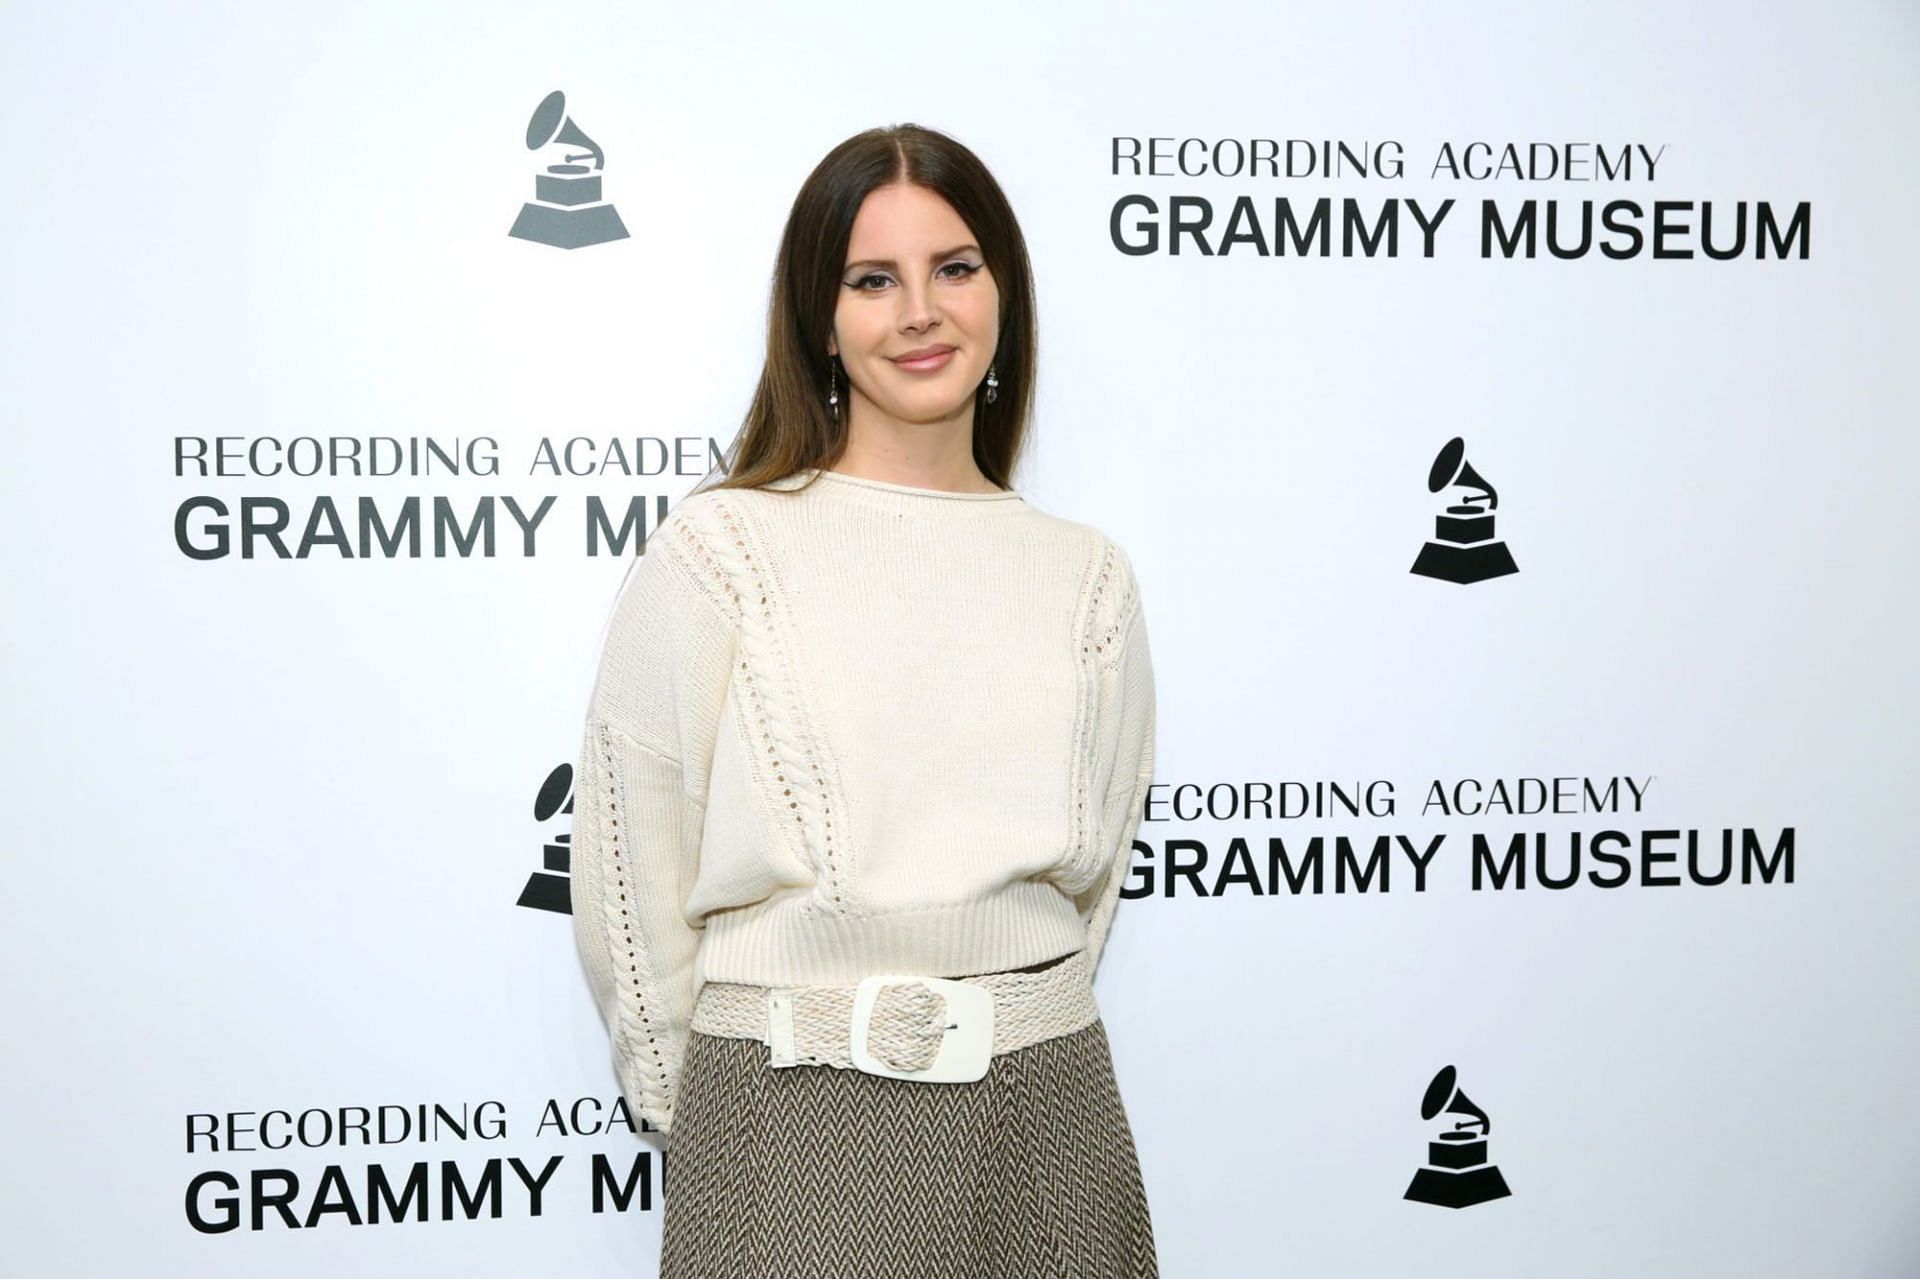 The picture of Lana Del Rey kissing her sister has been confirmed to be real (Image via Getty Images)